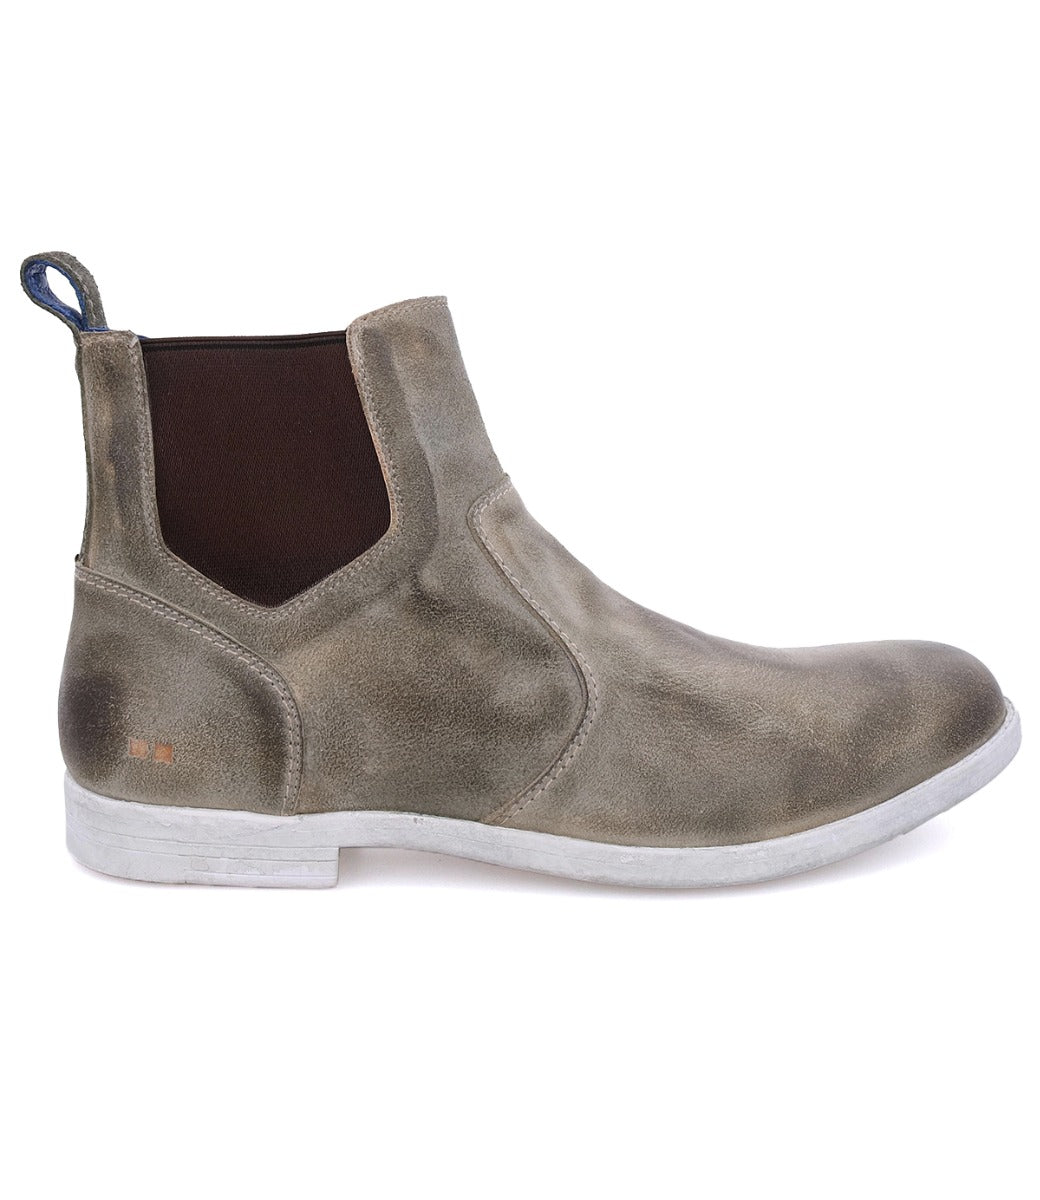 The Vasari men's chelsea boot in grey with white outs by Bed Stu.